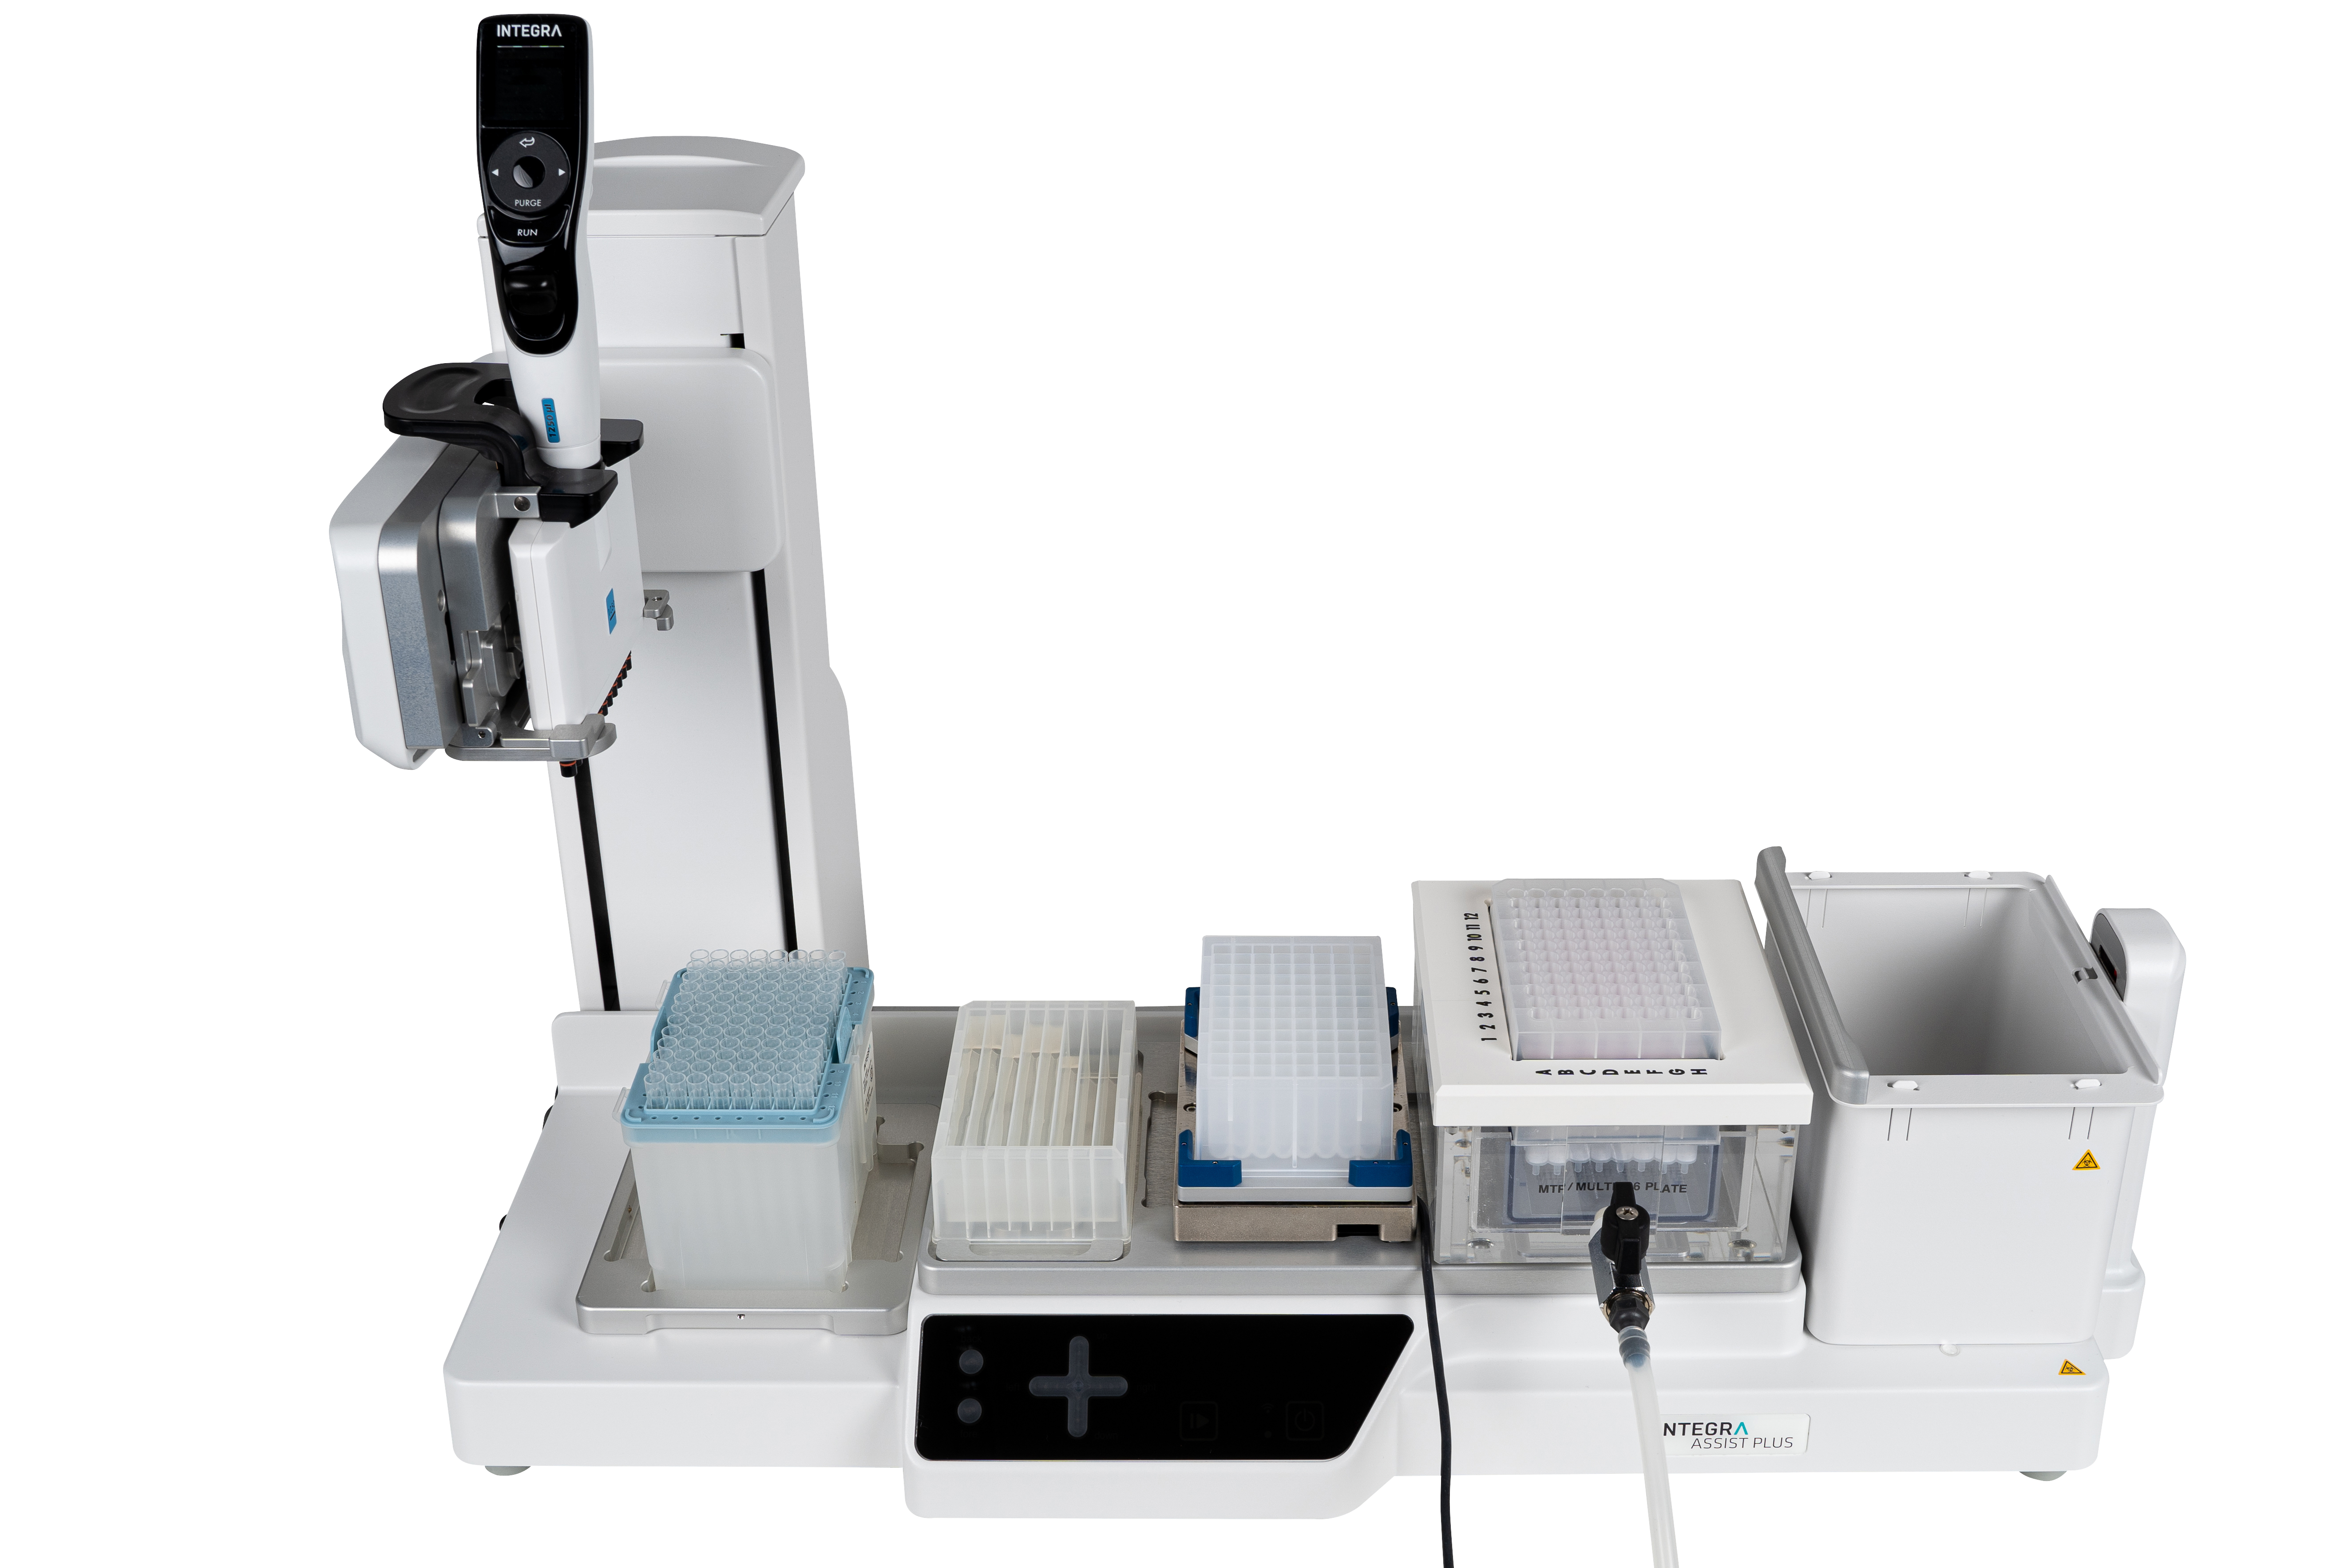 ASSIST PLUS pipetting robot with an 8 row reagent reservoir, a 96 square-well block on the Teleshake and MACHEREY-NAGEL's NucleoVac 96 Vacuum Manifold. 